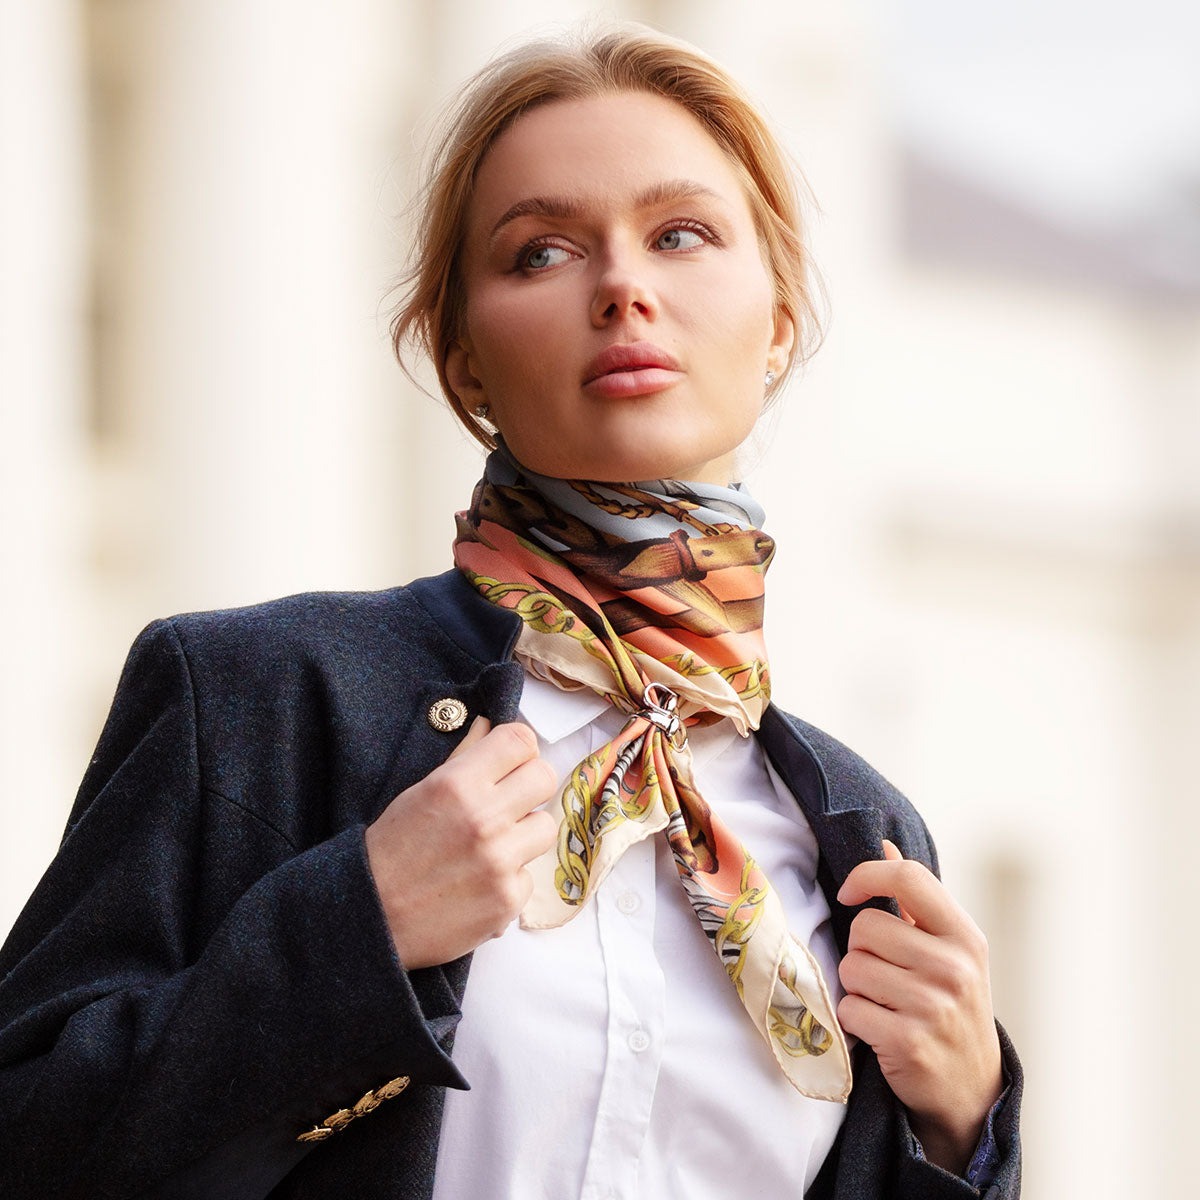 Silk Scarf Review: Luxurious and Stylish Accessory